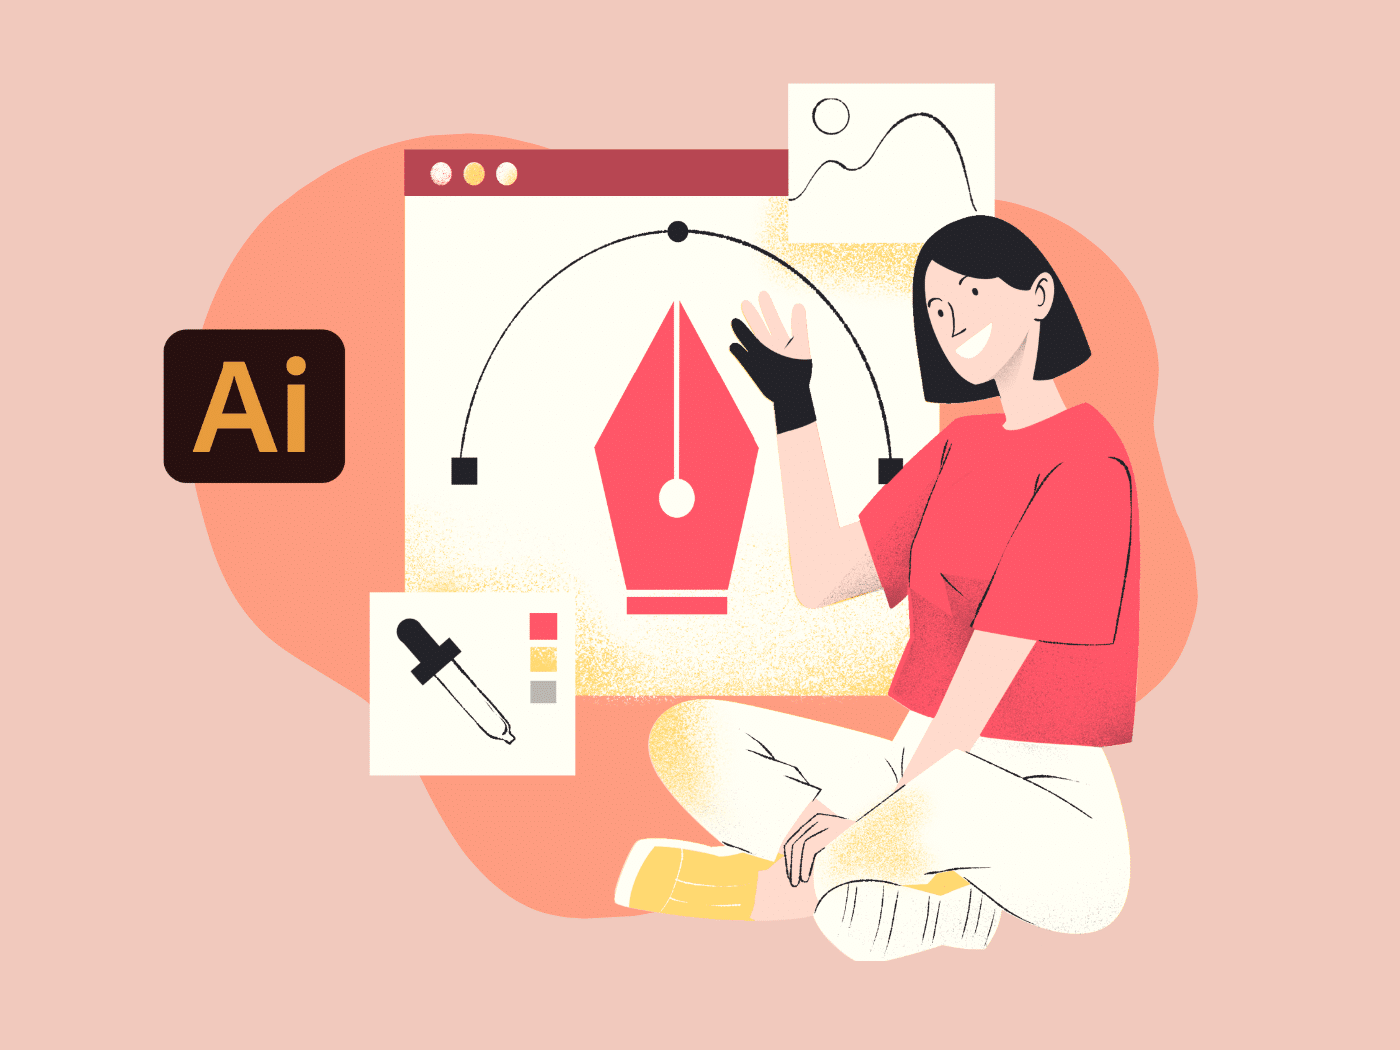 How to Embed Images in Illustrator